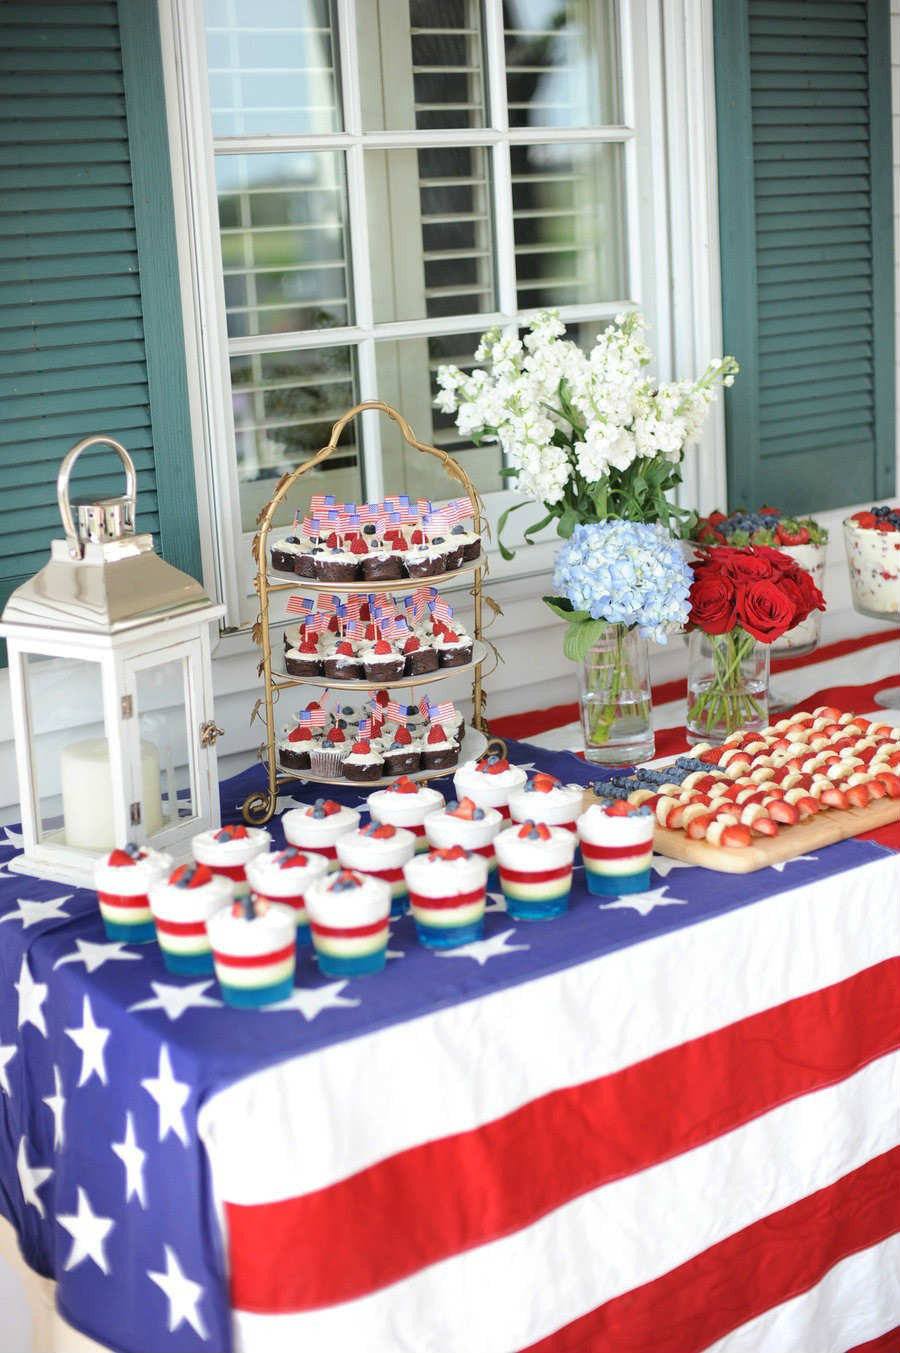 4th Of July Party Decorating Ideas
 10 Fourth of July Decoration Ideas Tinyme Blog